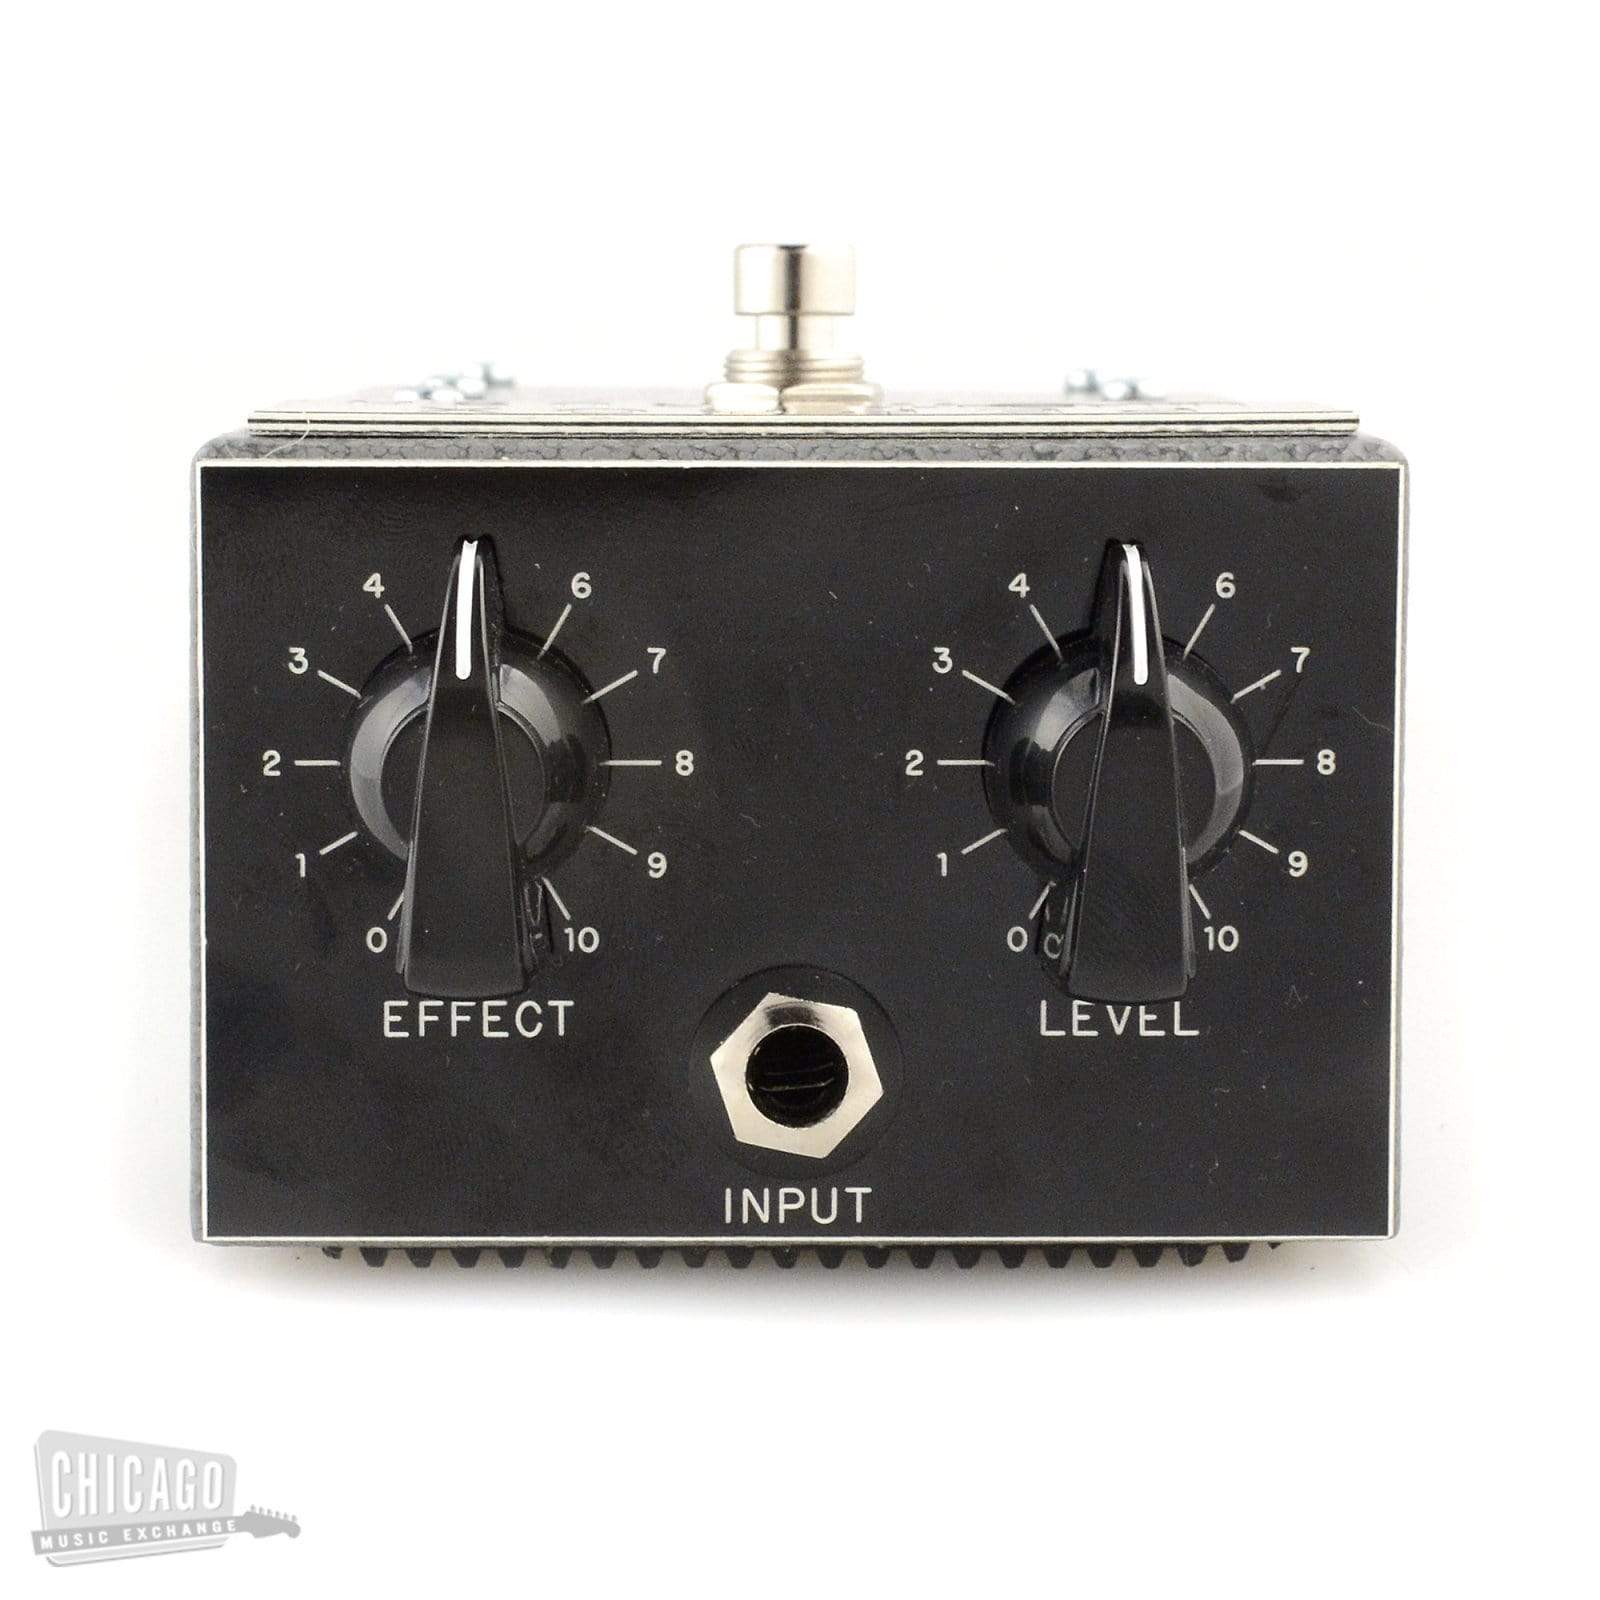 British Pedal Company WEM Pep Box Reissue (Limited Edition) Effects and Pedals / Fuzz